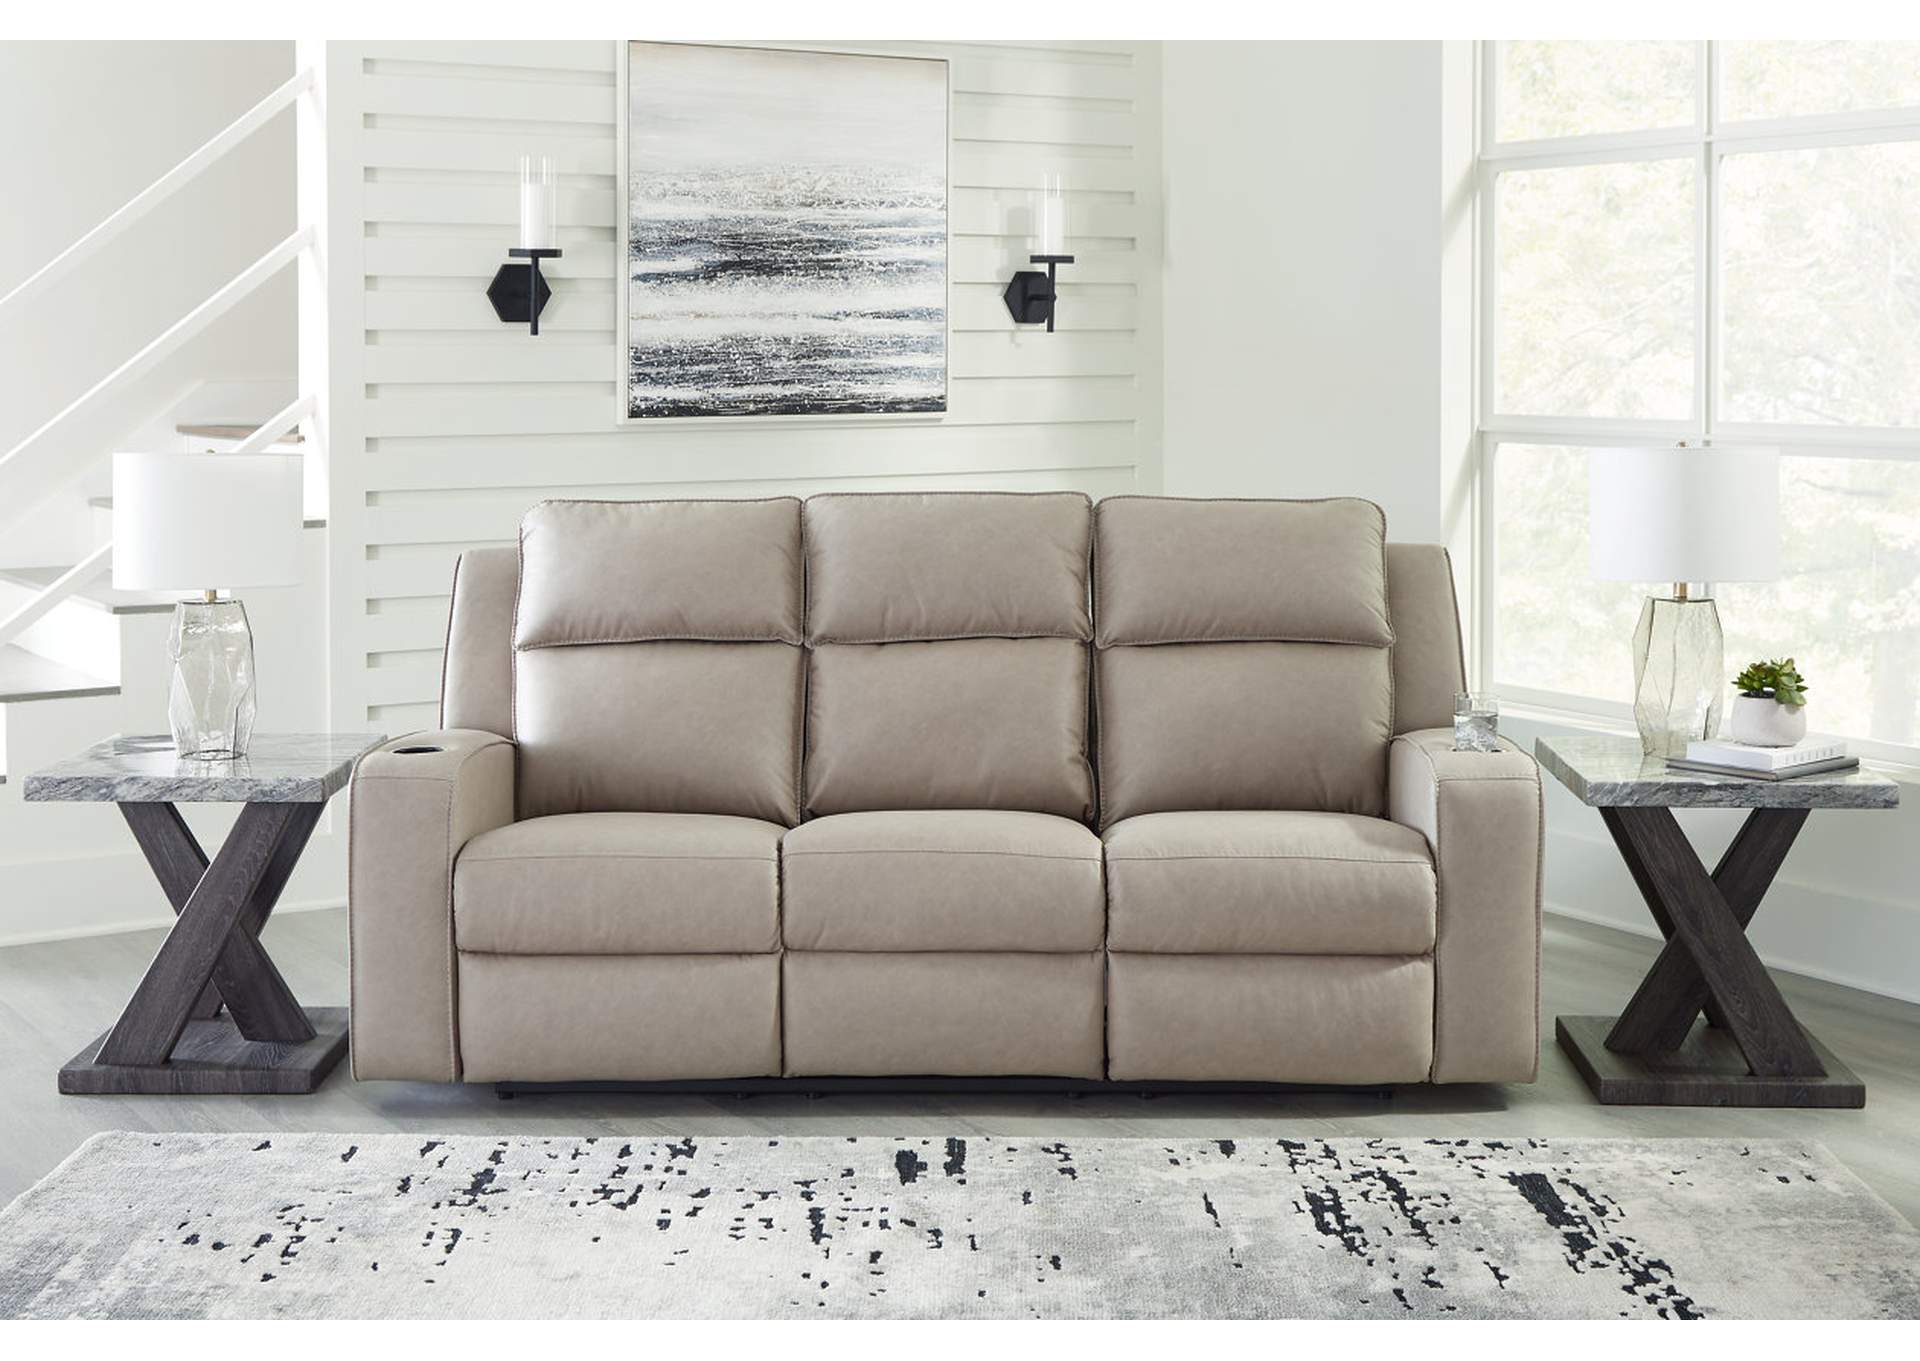 Lavenhorne Reclining Sofa with Drop Down Table,Signature Design By Ashley